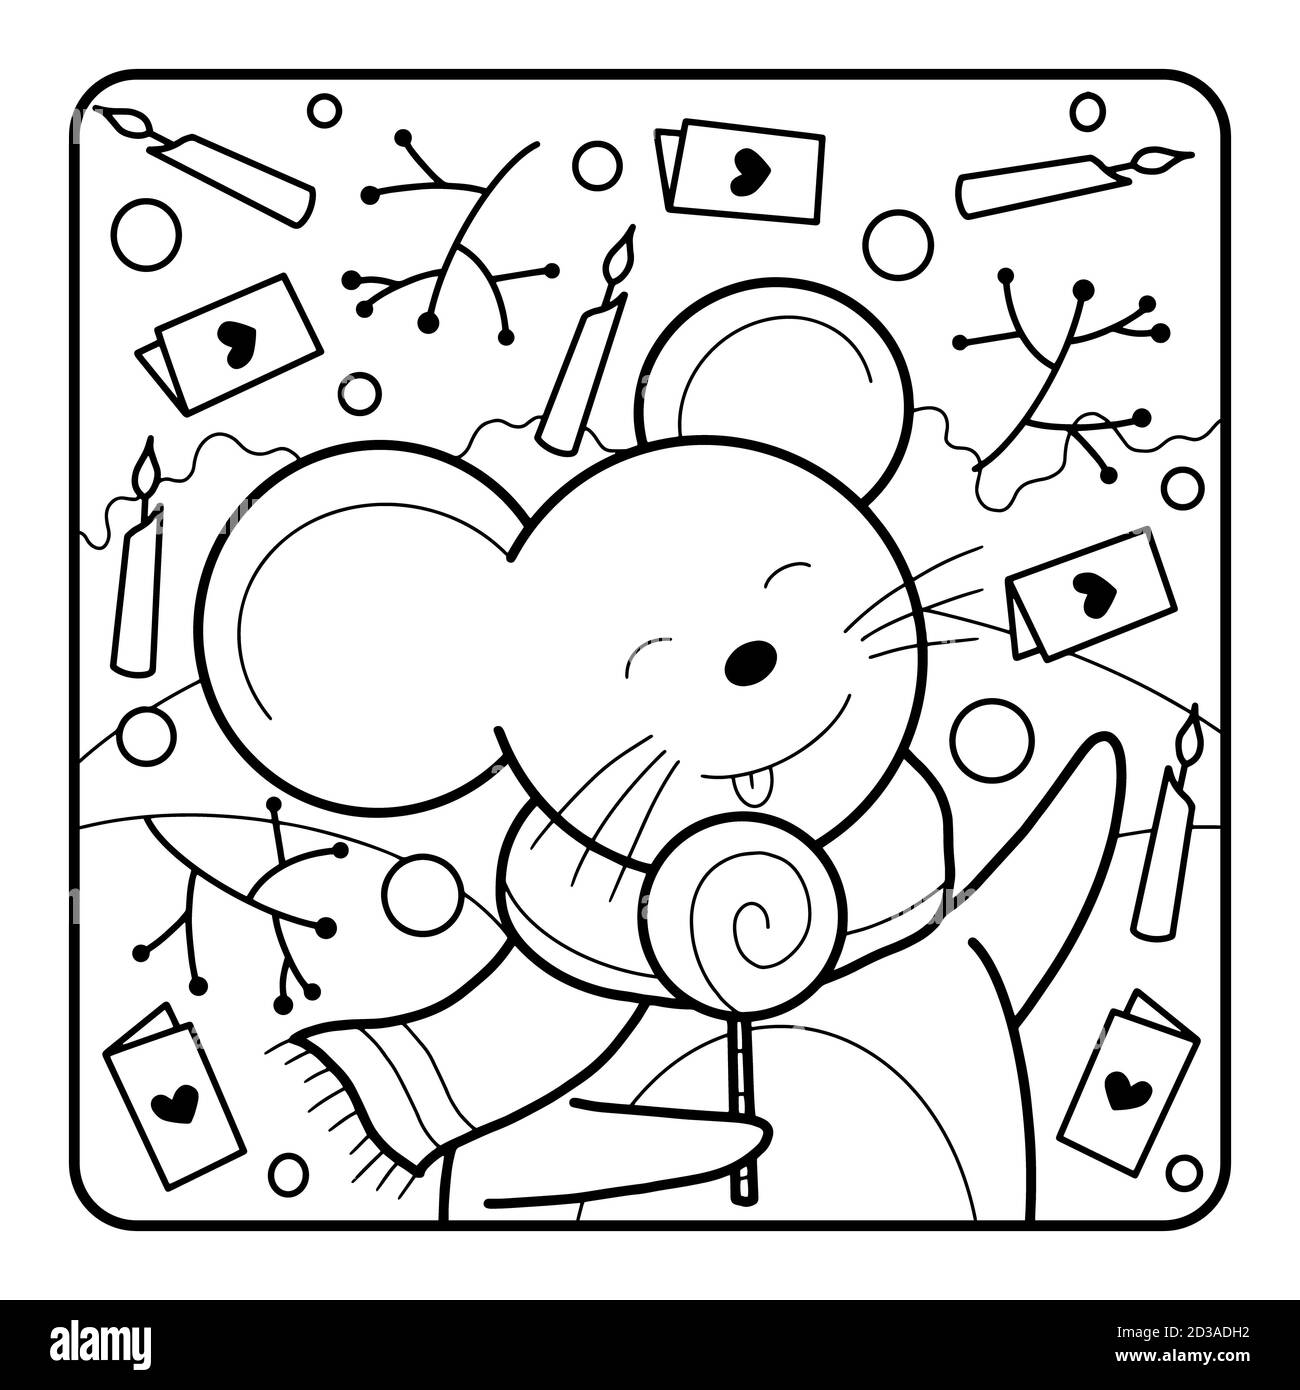 christmas-coloring-page-for-kids-stock-photo-alamy